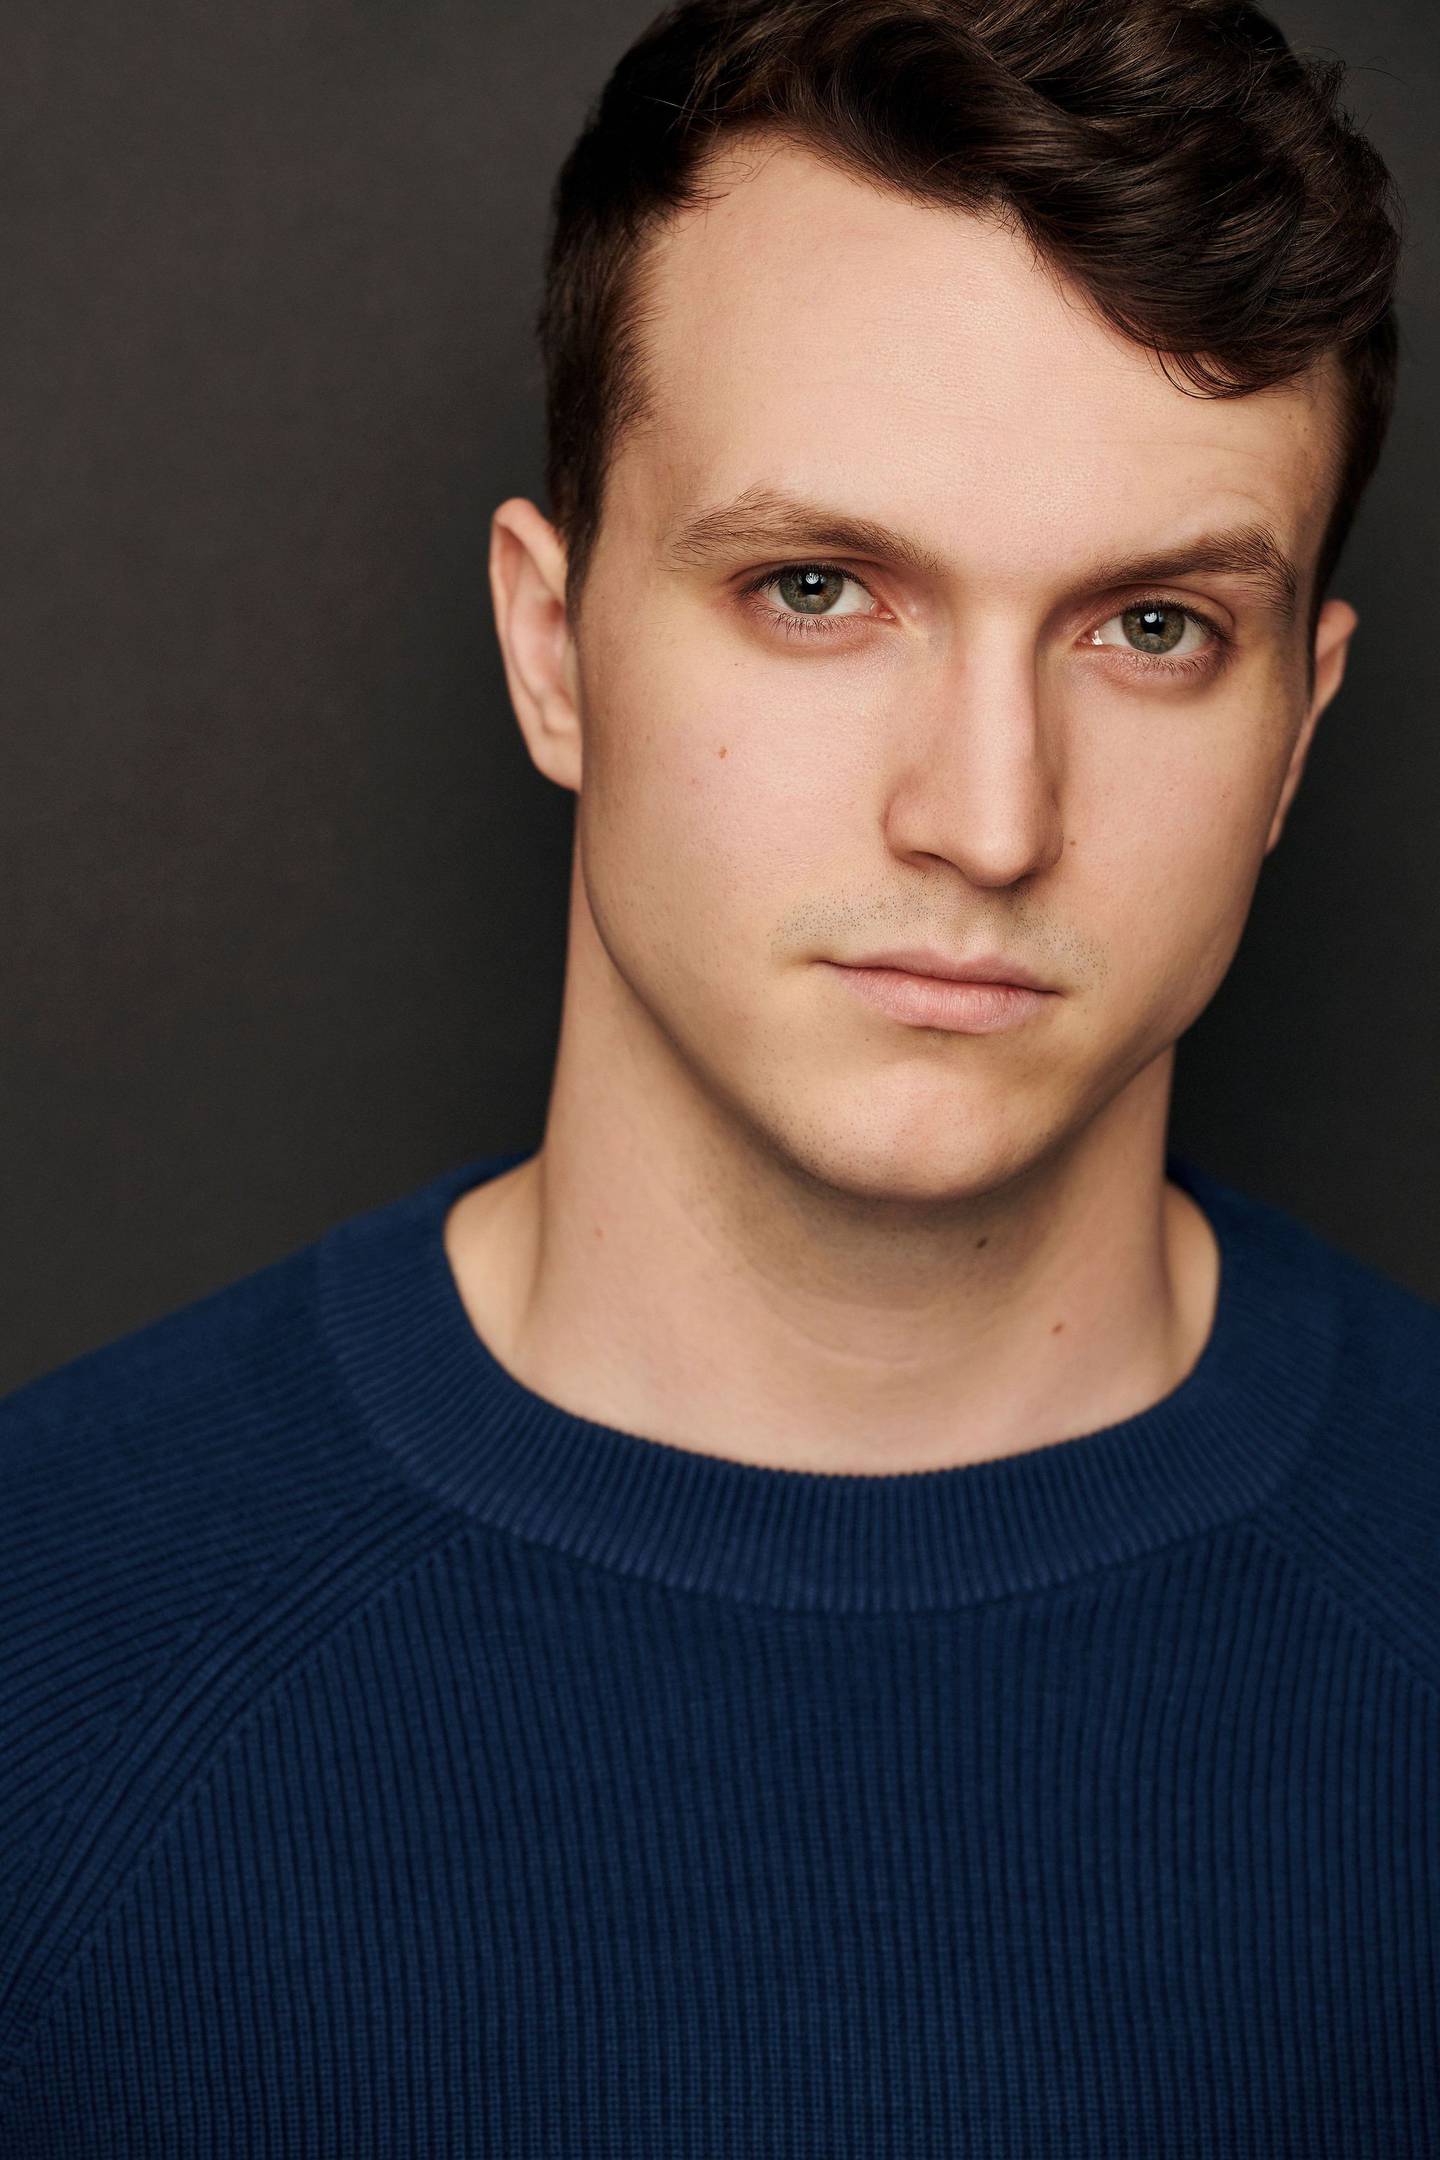 Texas native Connor Barr plays the role of Charlie Brown in “A Charlie Brown Christmas Live On Stage." The show coming to the Rialto Square Theater in Joliet, on Wednesday, Nov. 30, 2022. Tickets are on sale now.